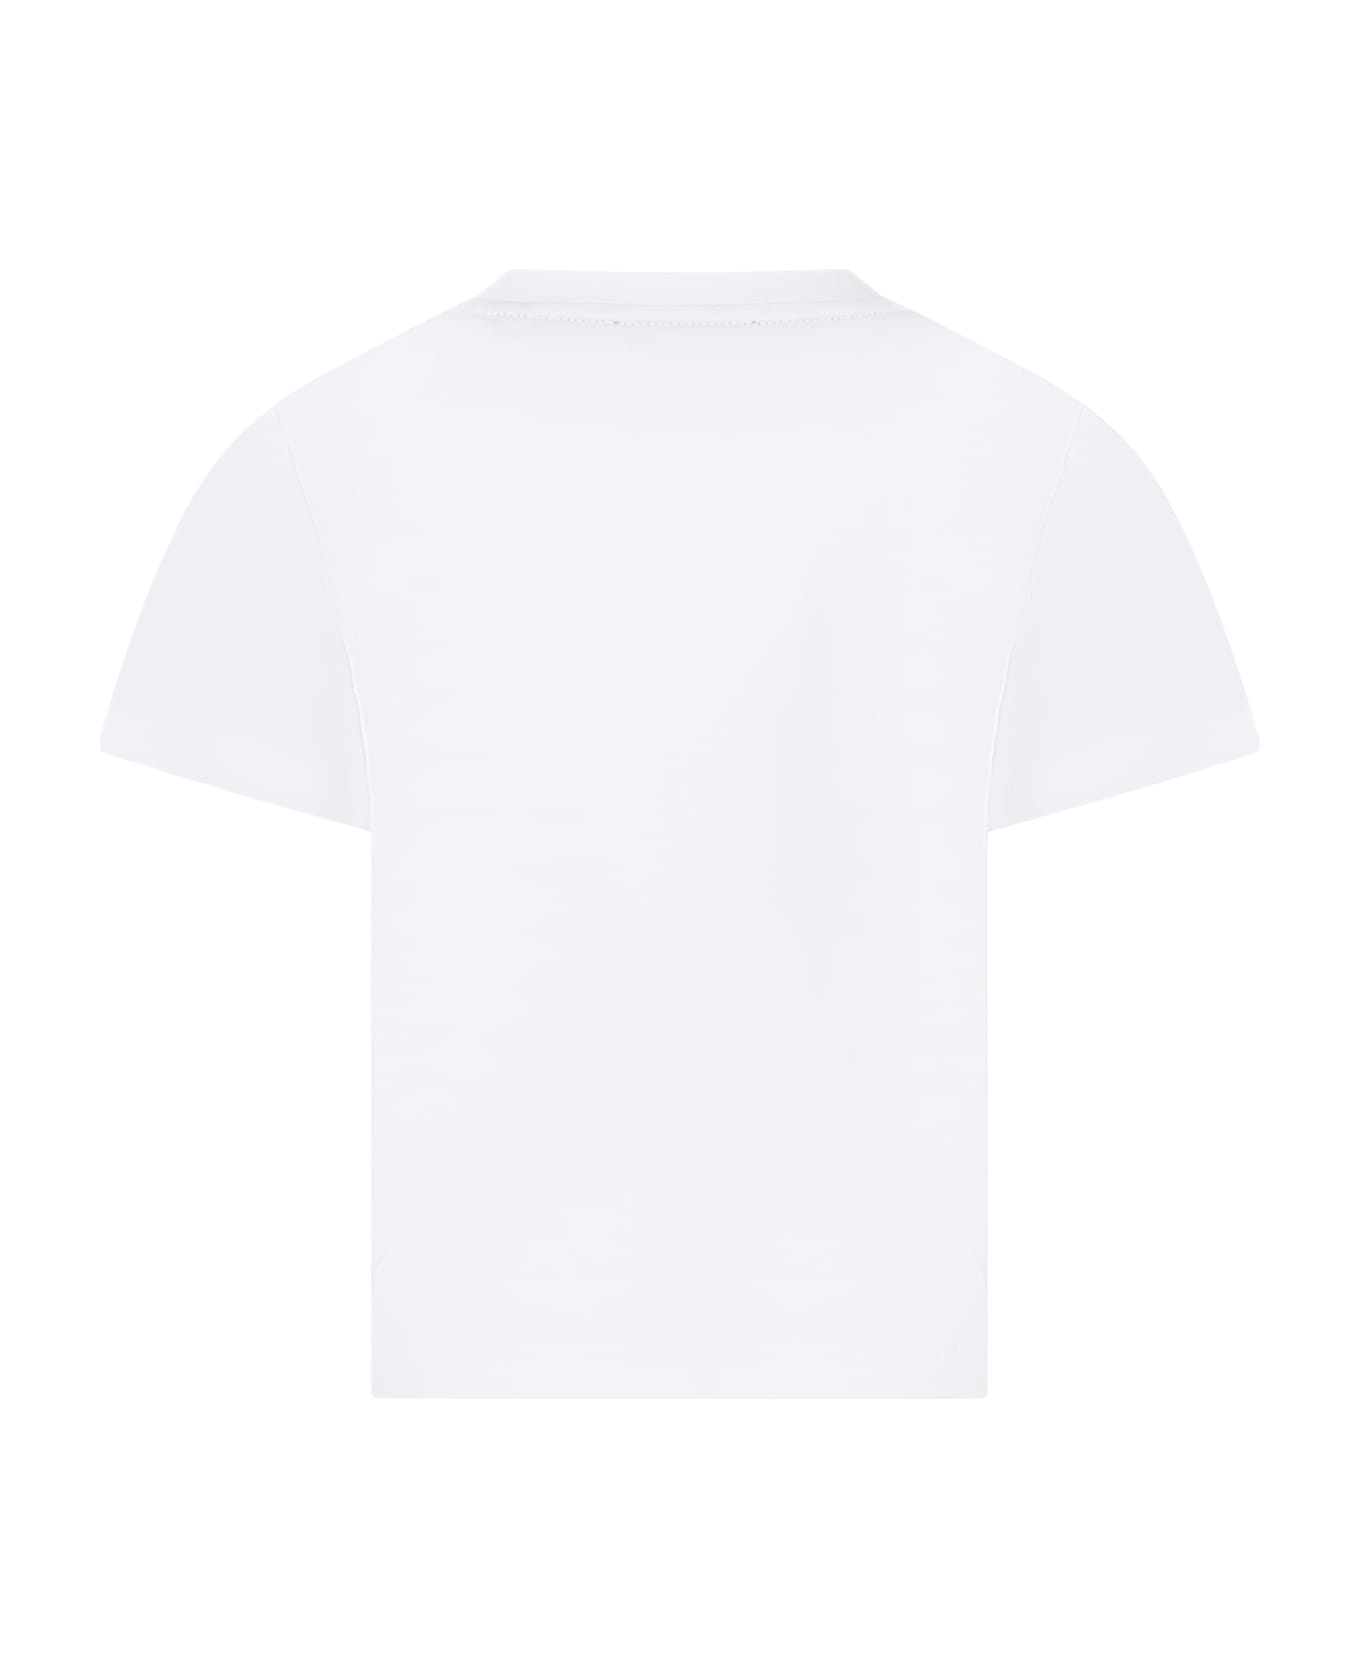 Burberry White T-shirt For Boy With Print - White